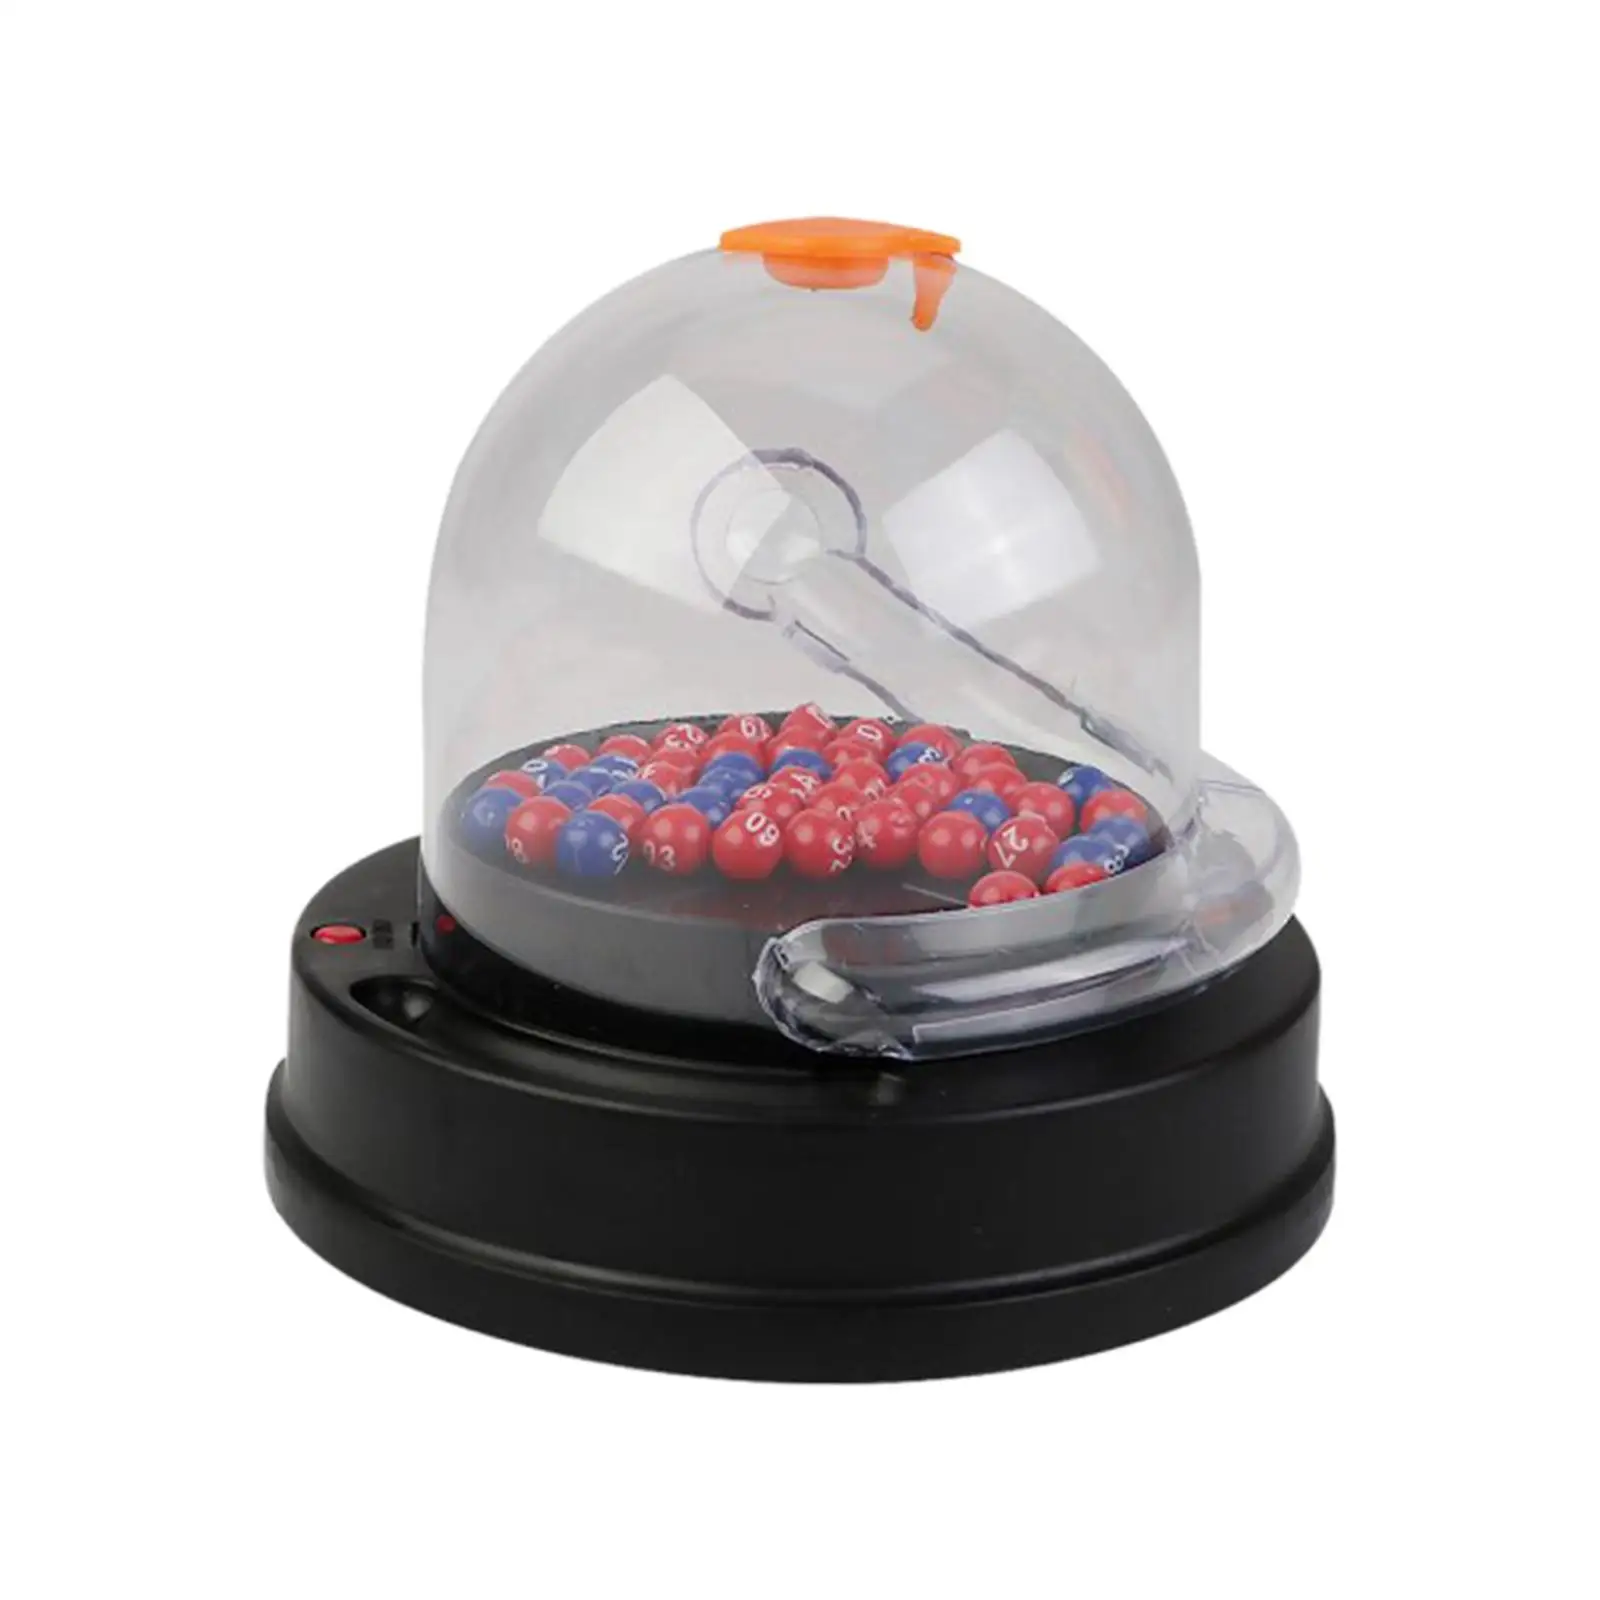 Electric Lottery Toy with Balls Portable Bingo Machine Cage Game Number Picking Machine for Dancehall Karaoke Sweepstakes